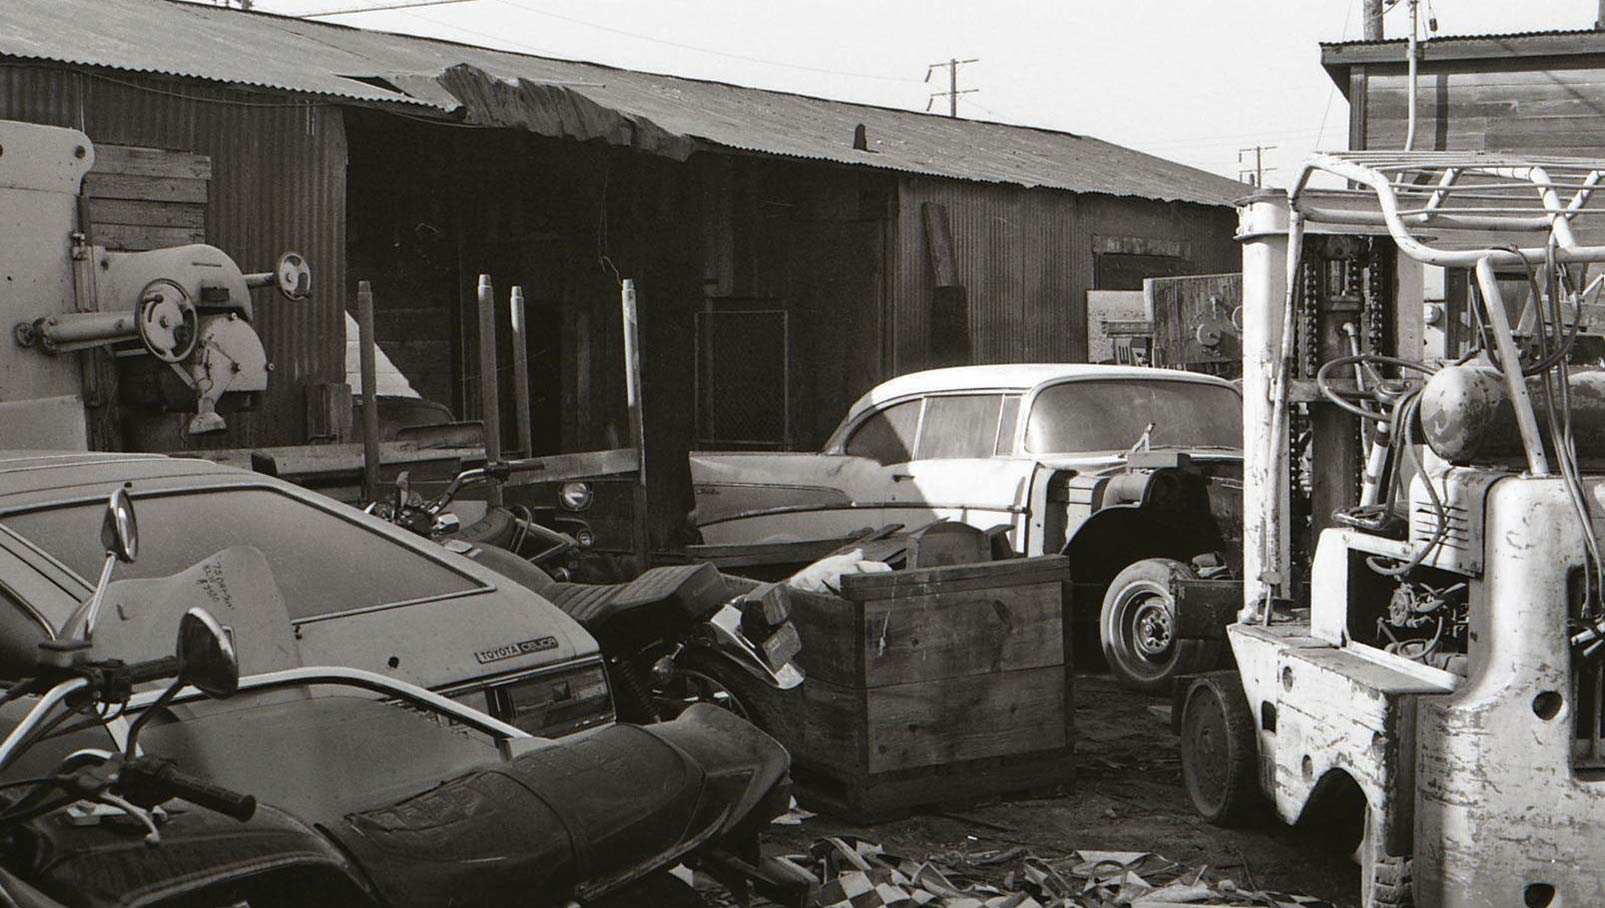 A small tire shop across the street was kept busy salvaging flat tires and selling us some used ones so the cars could be moved